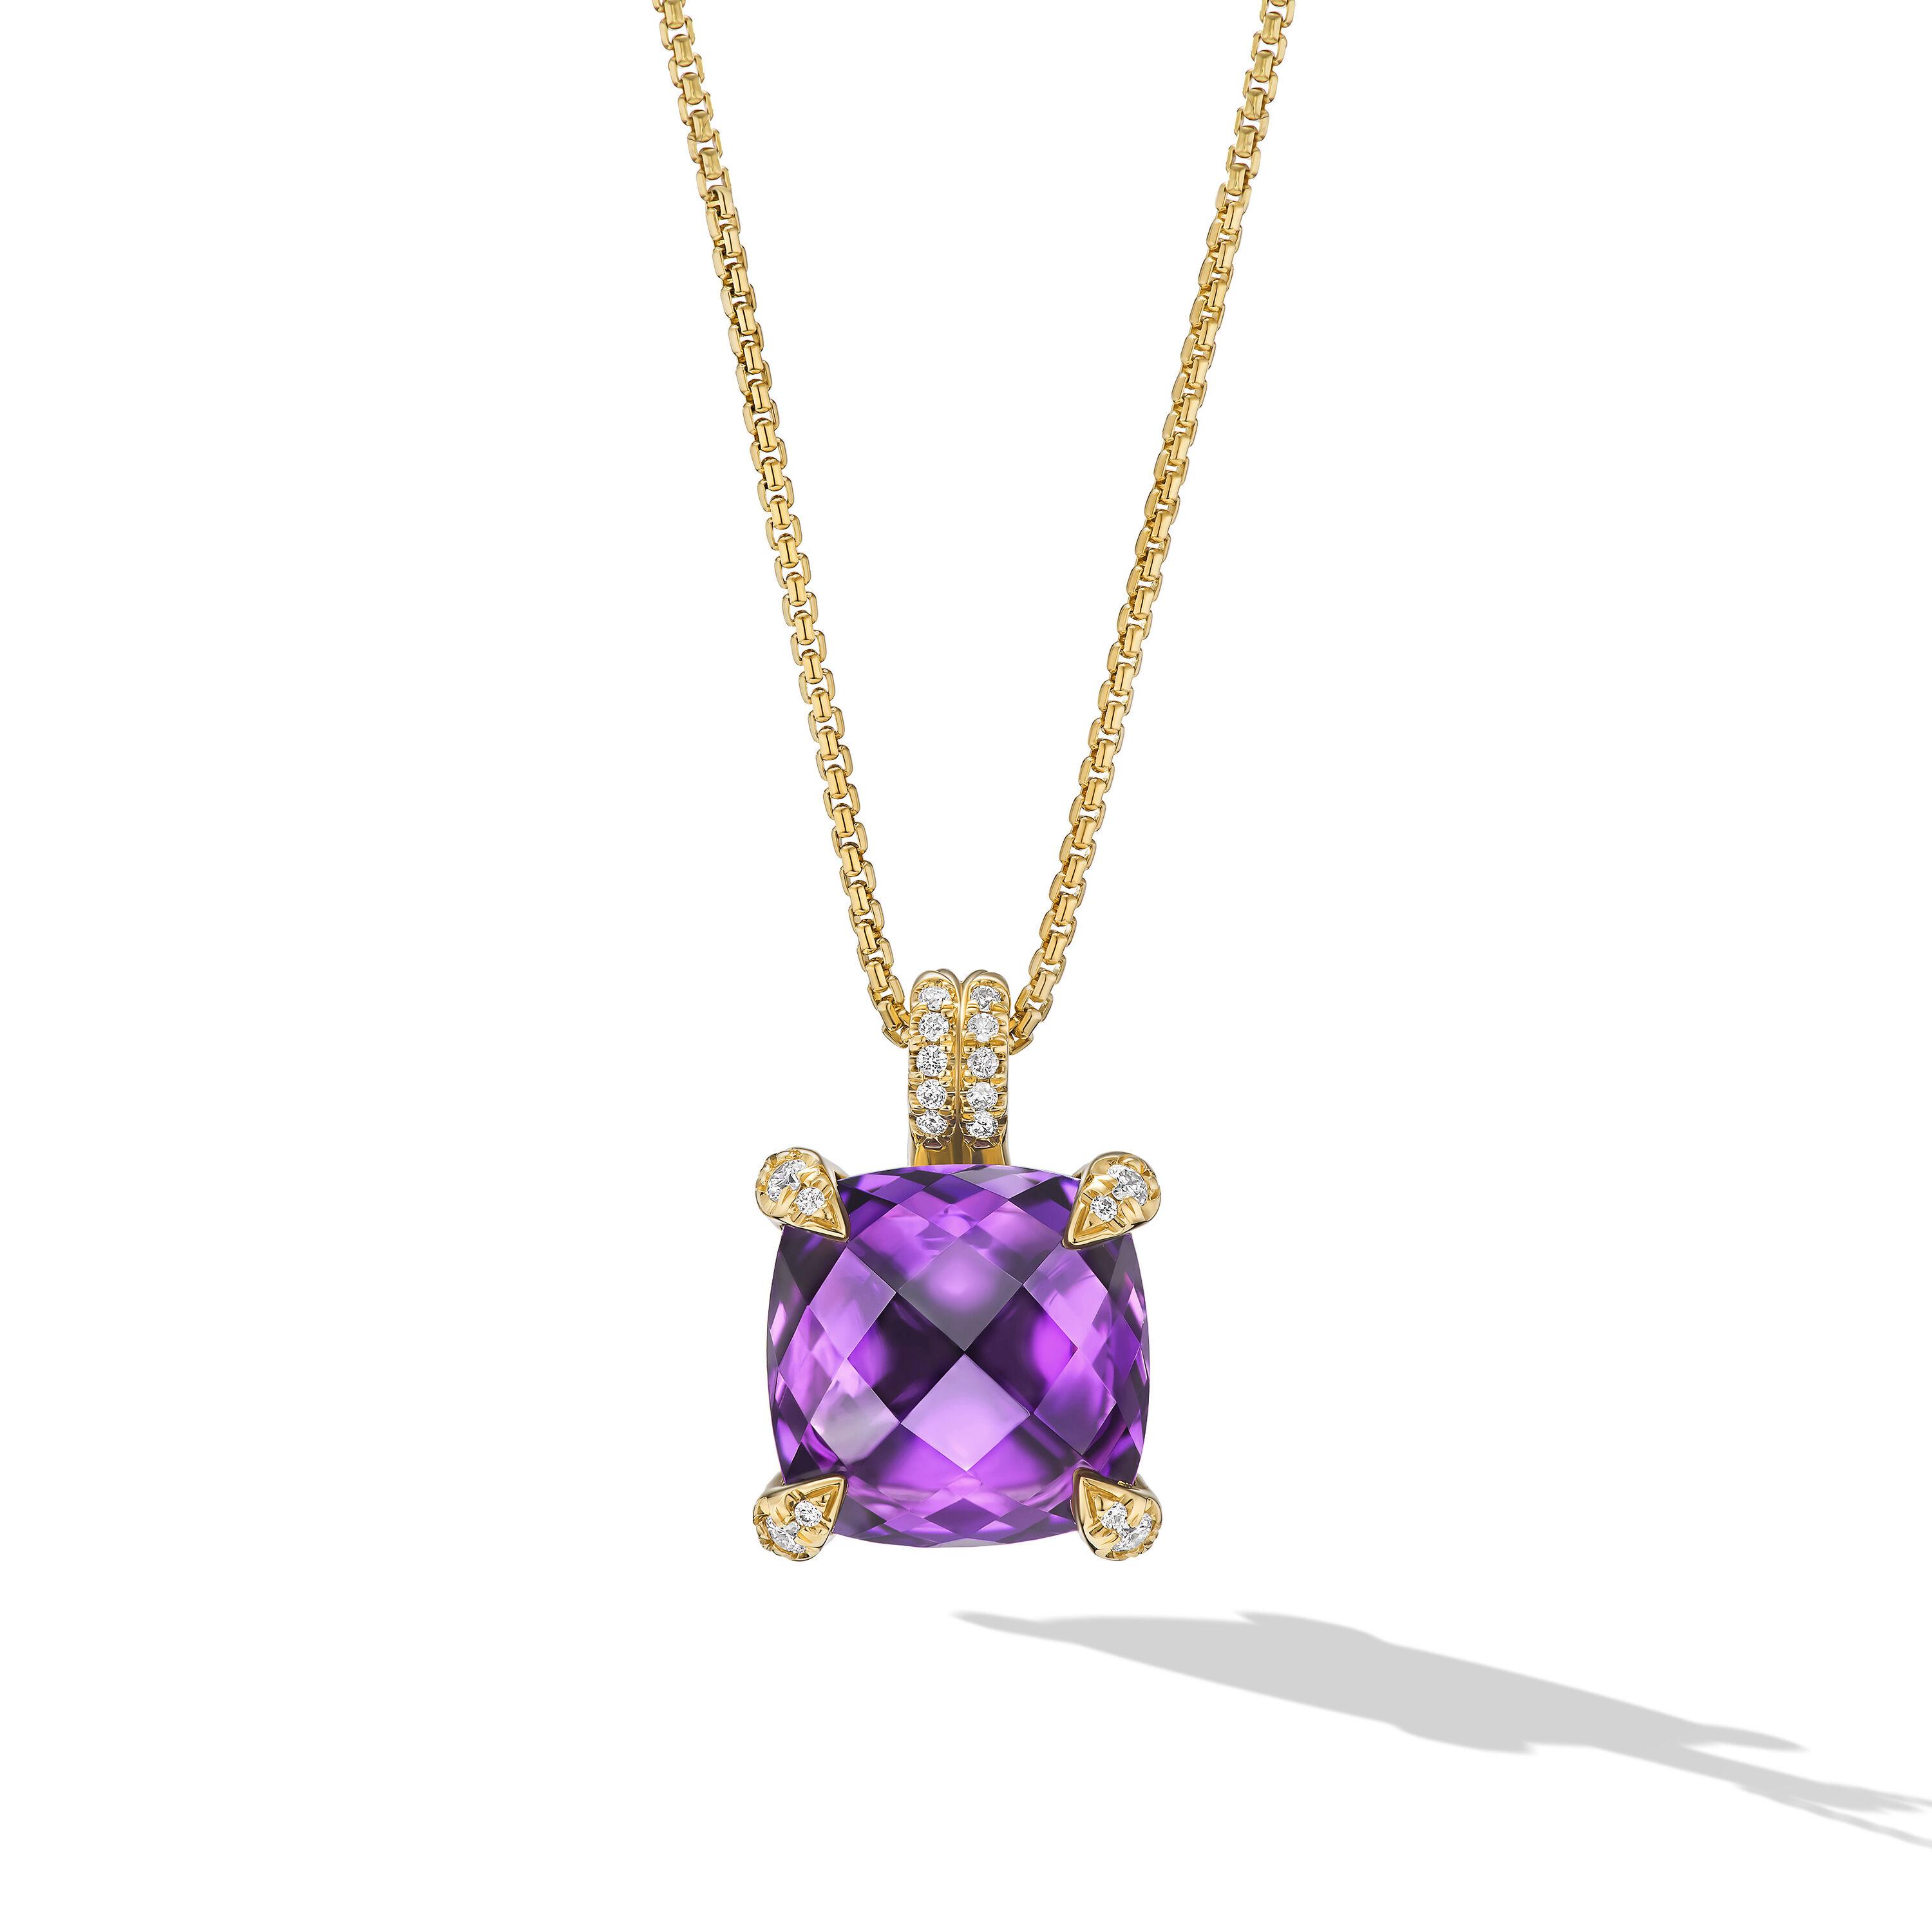 David Yurman Chatelaine Pendant Necklace in 18K Yellow Gold with Amethyst and Diamonds, 11mm